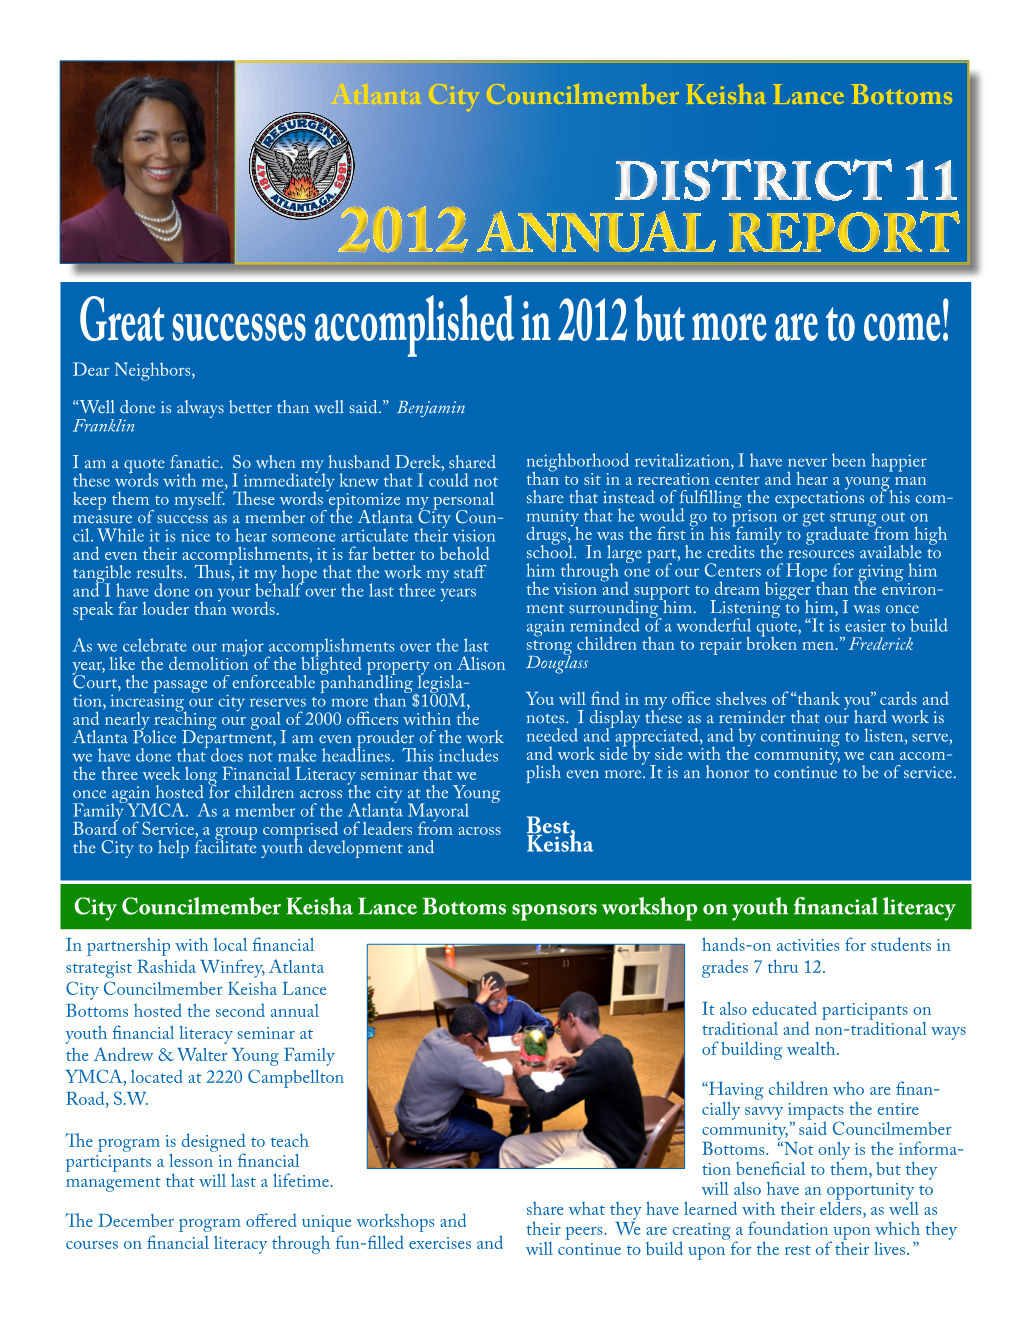 Great Successes Accomplished in 2012 but More Are to Come!